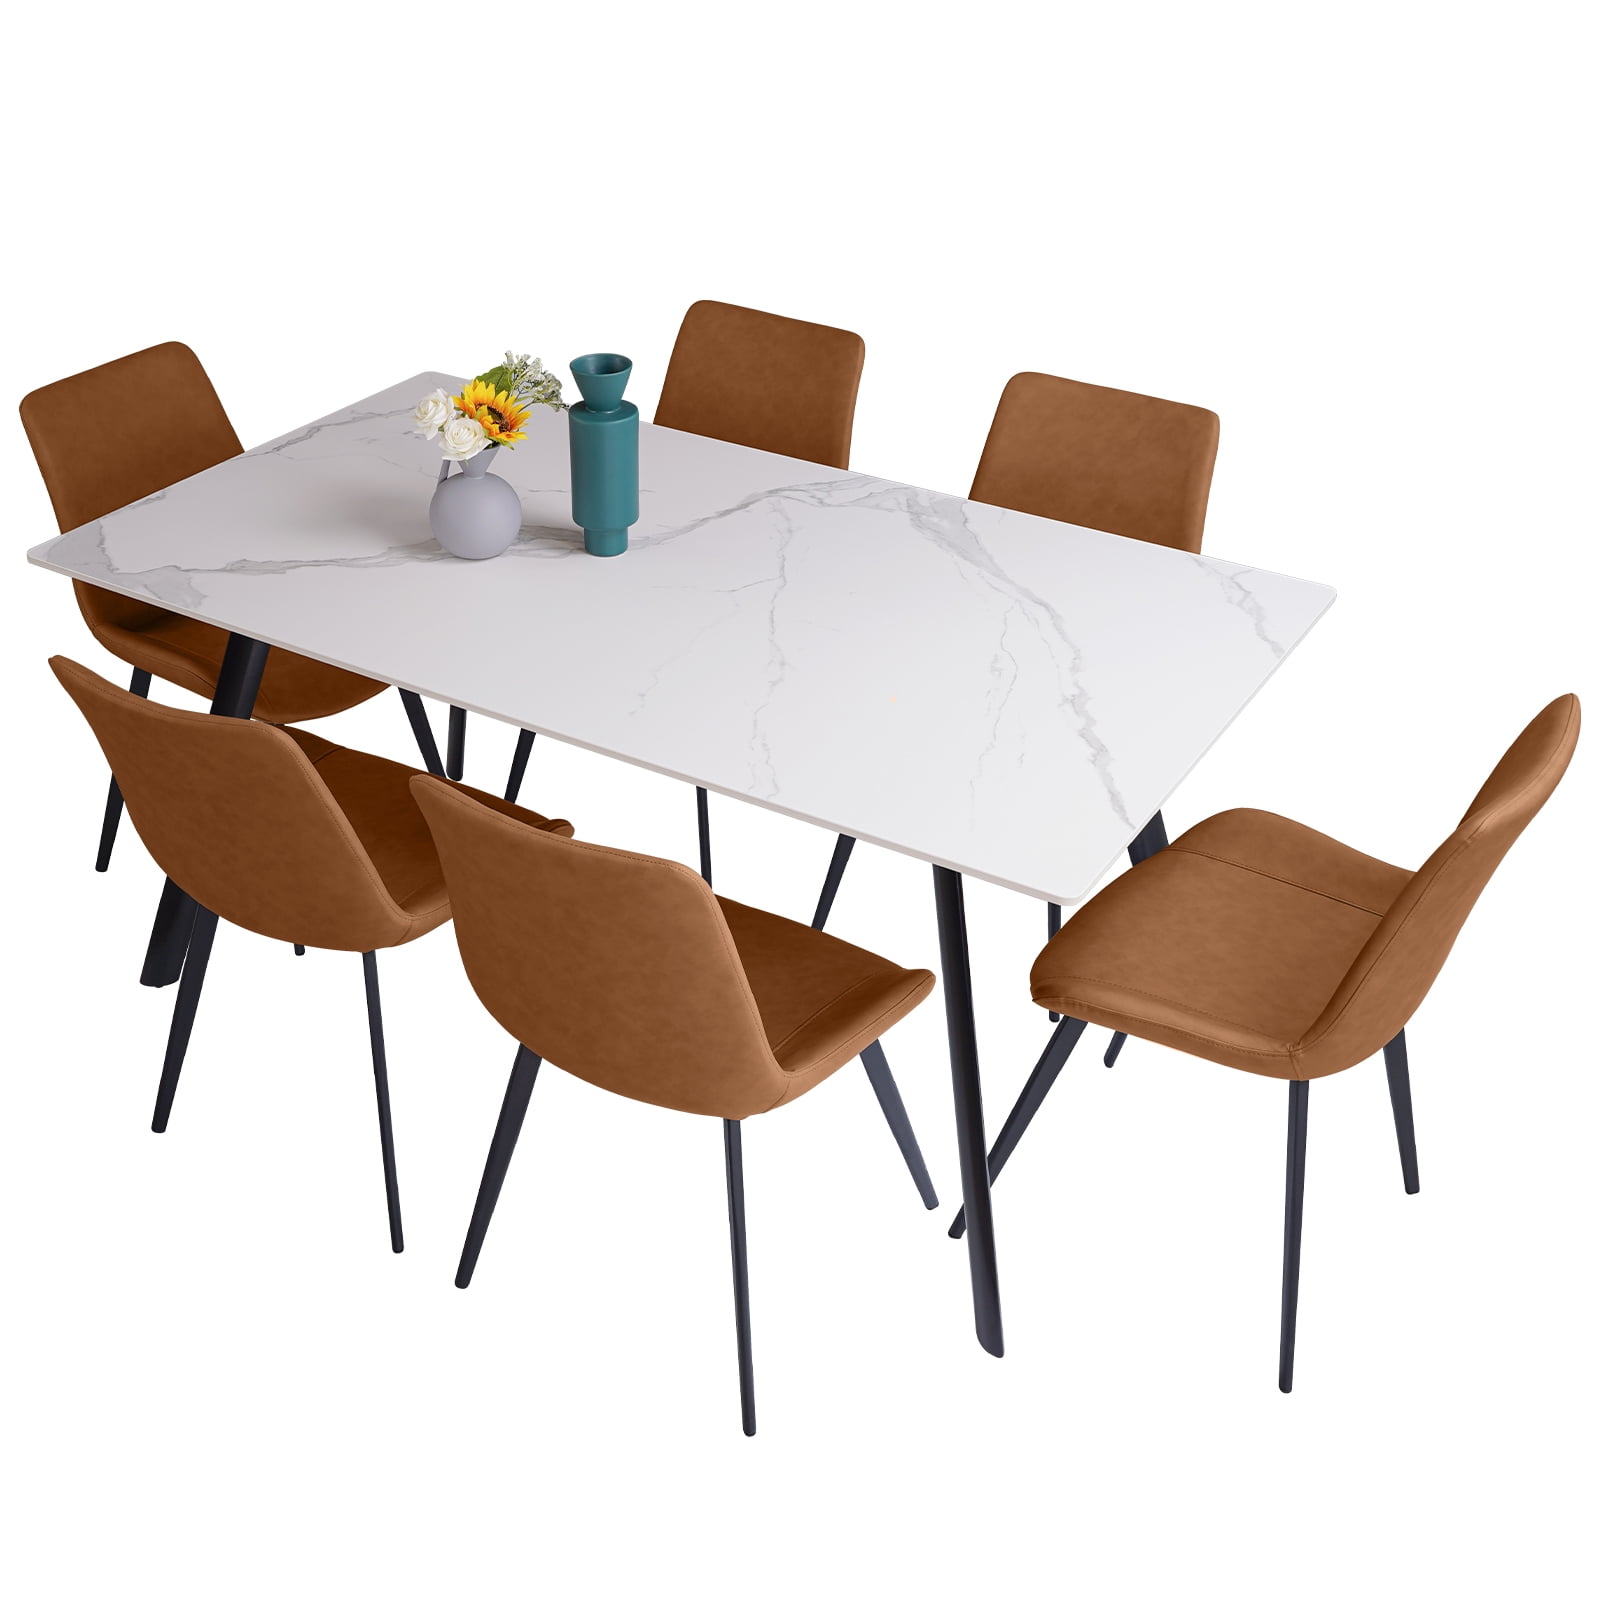 7 Piece Dining Table Sets,Stable Sintered Stone & Leather Modern Dining ...